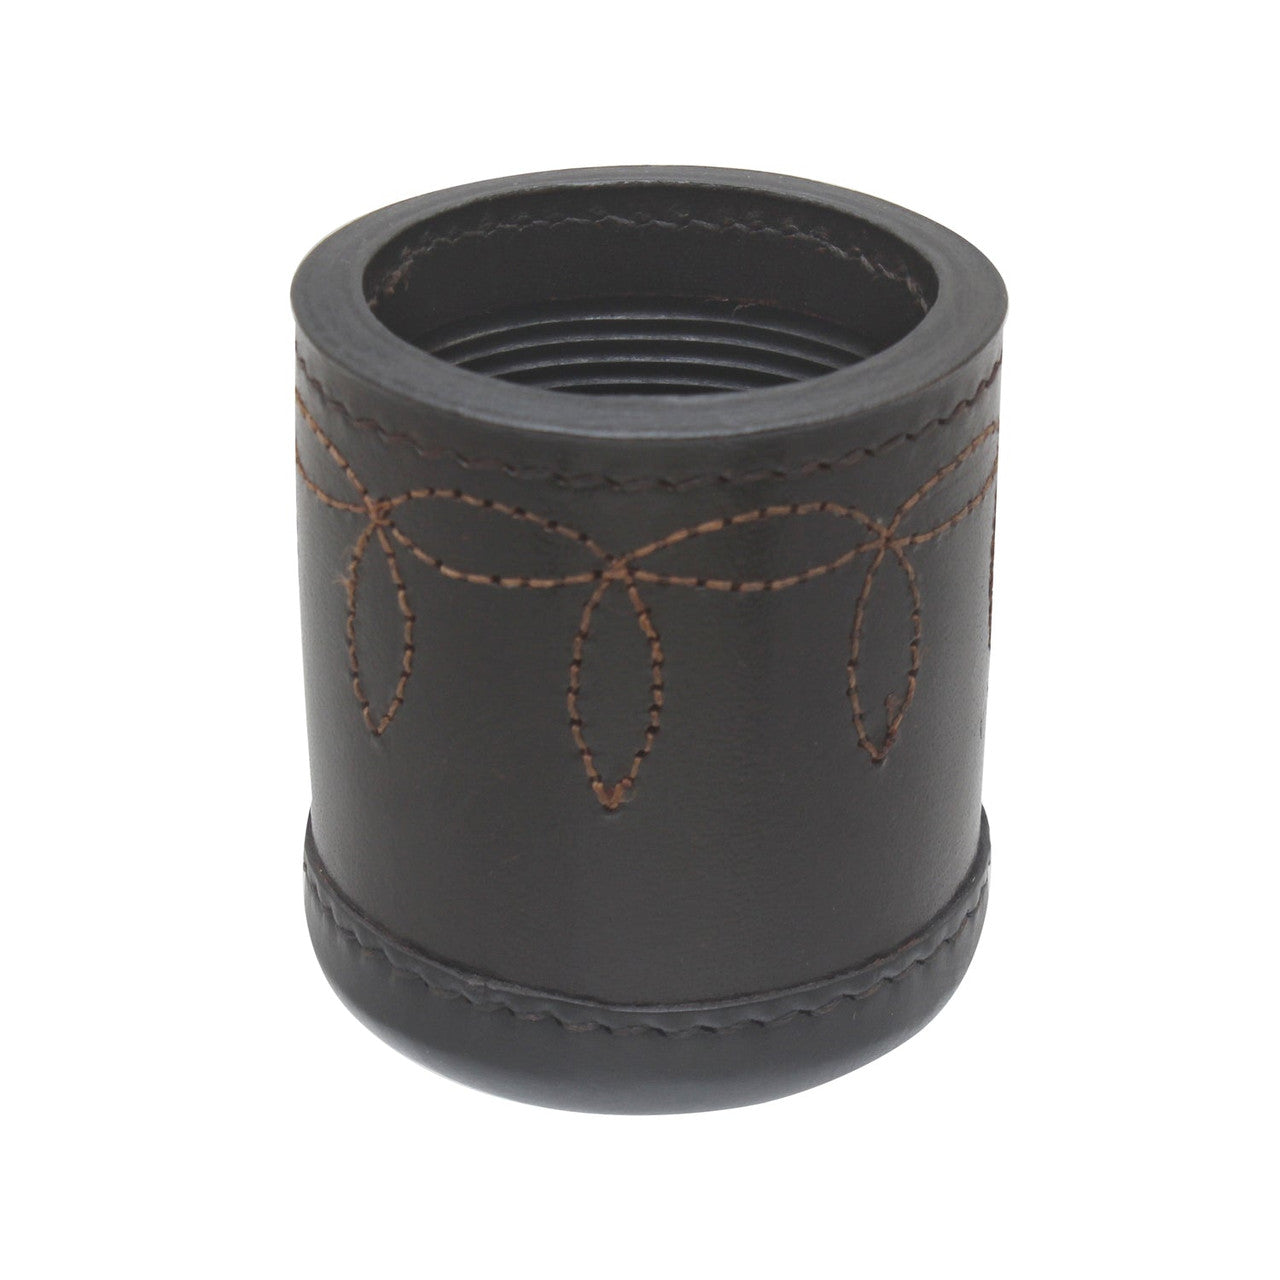 dice cup,cup,black dice cup,leather dice cup ,leather brown dice cup,